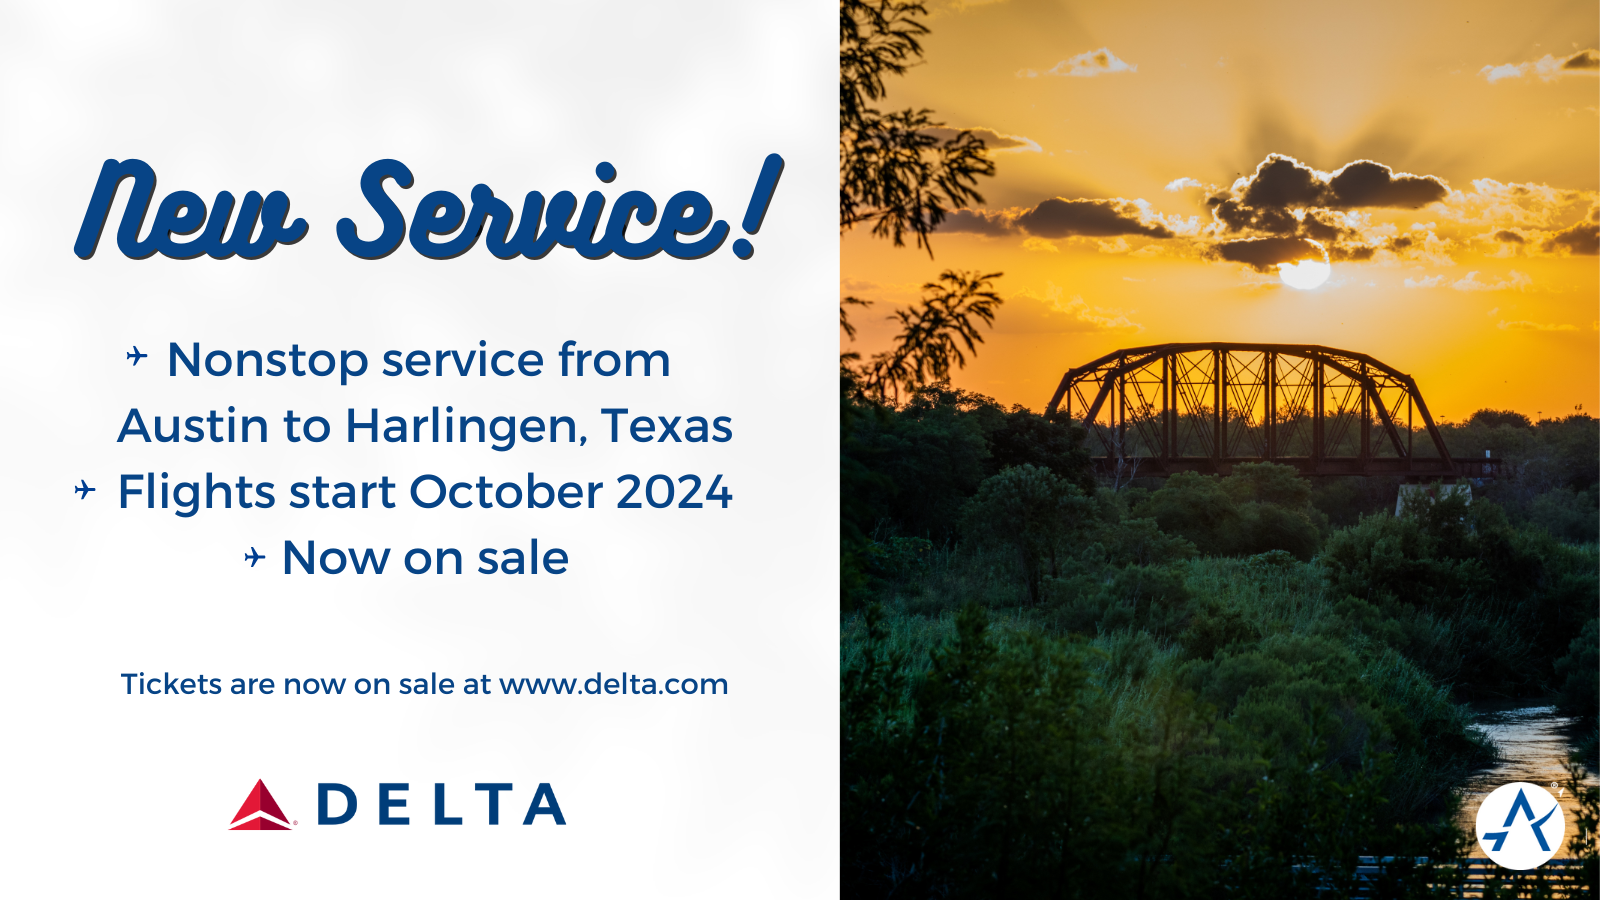 A graphic with text that reads, "New Service! Nonstop service from Austin to Harlingen, Texas. Flights start October 2024. Now on sale."